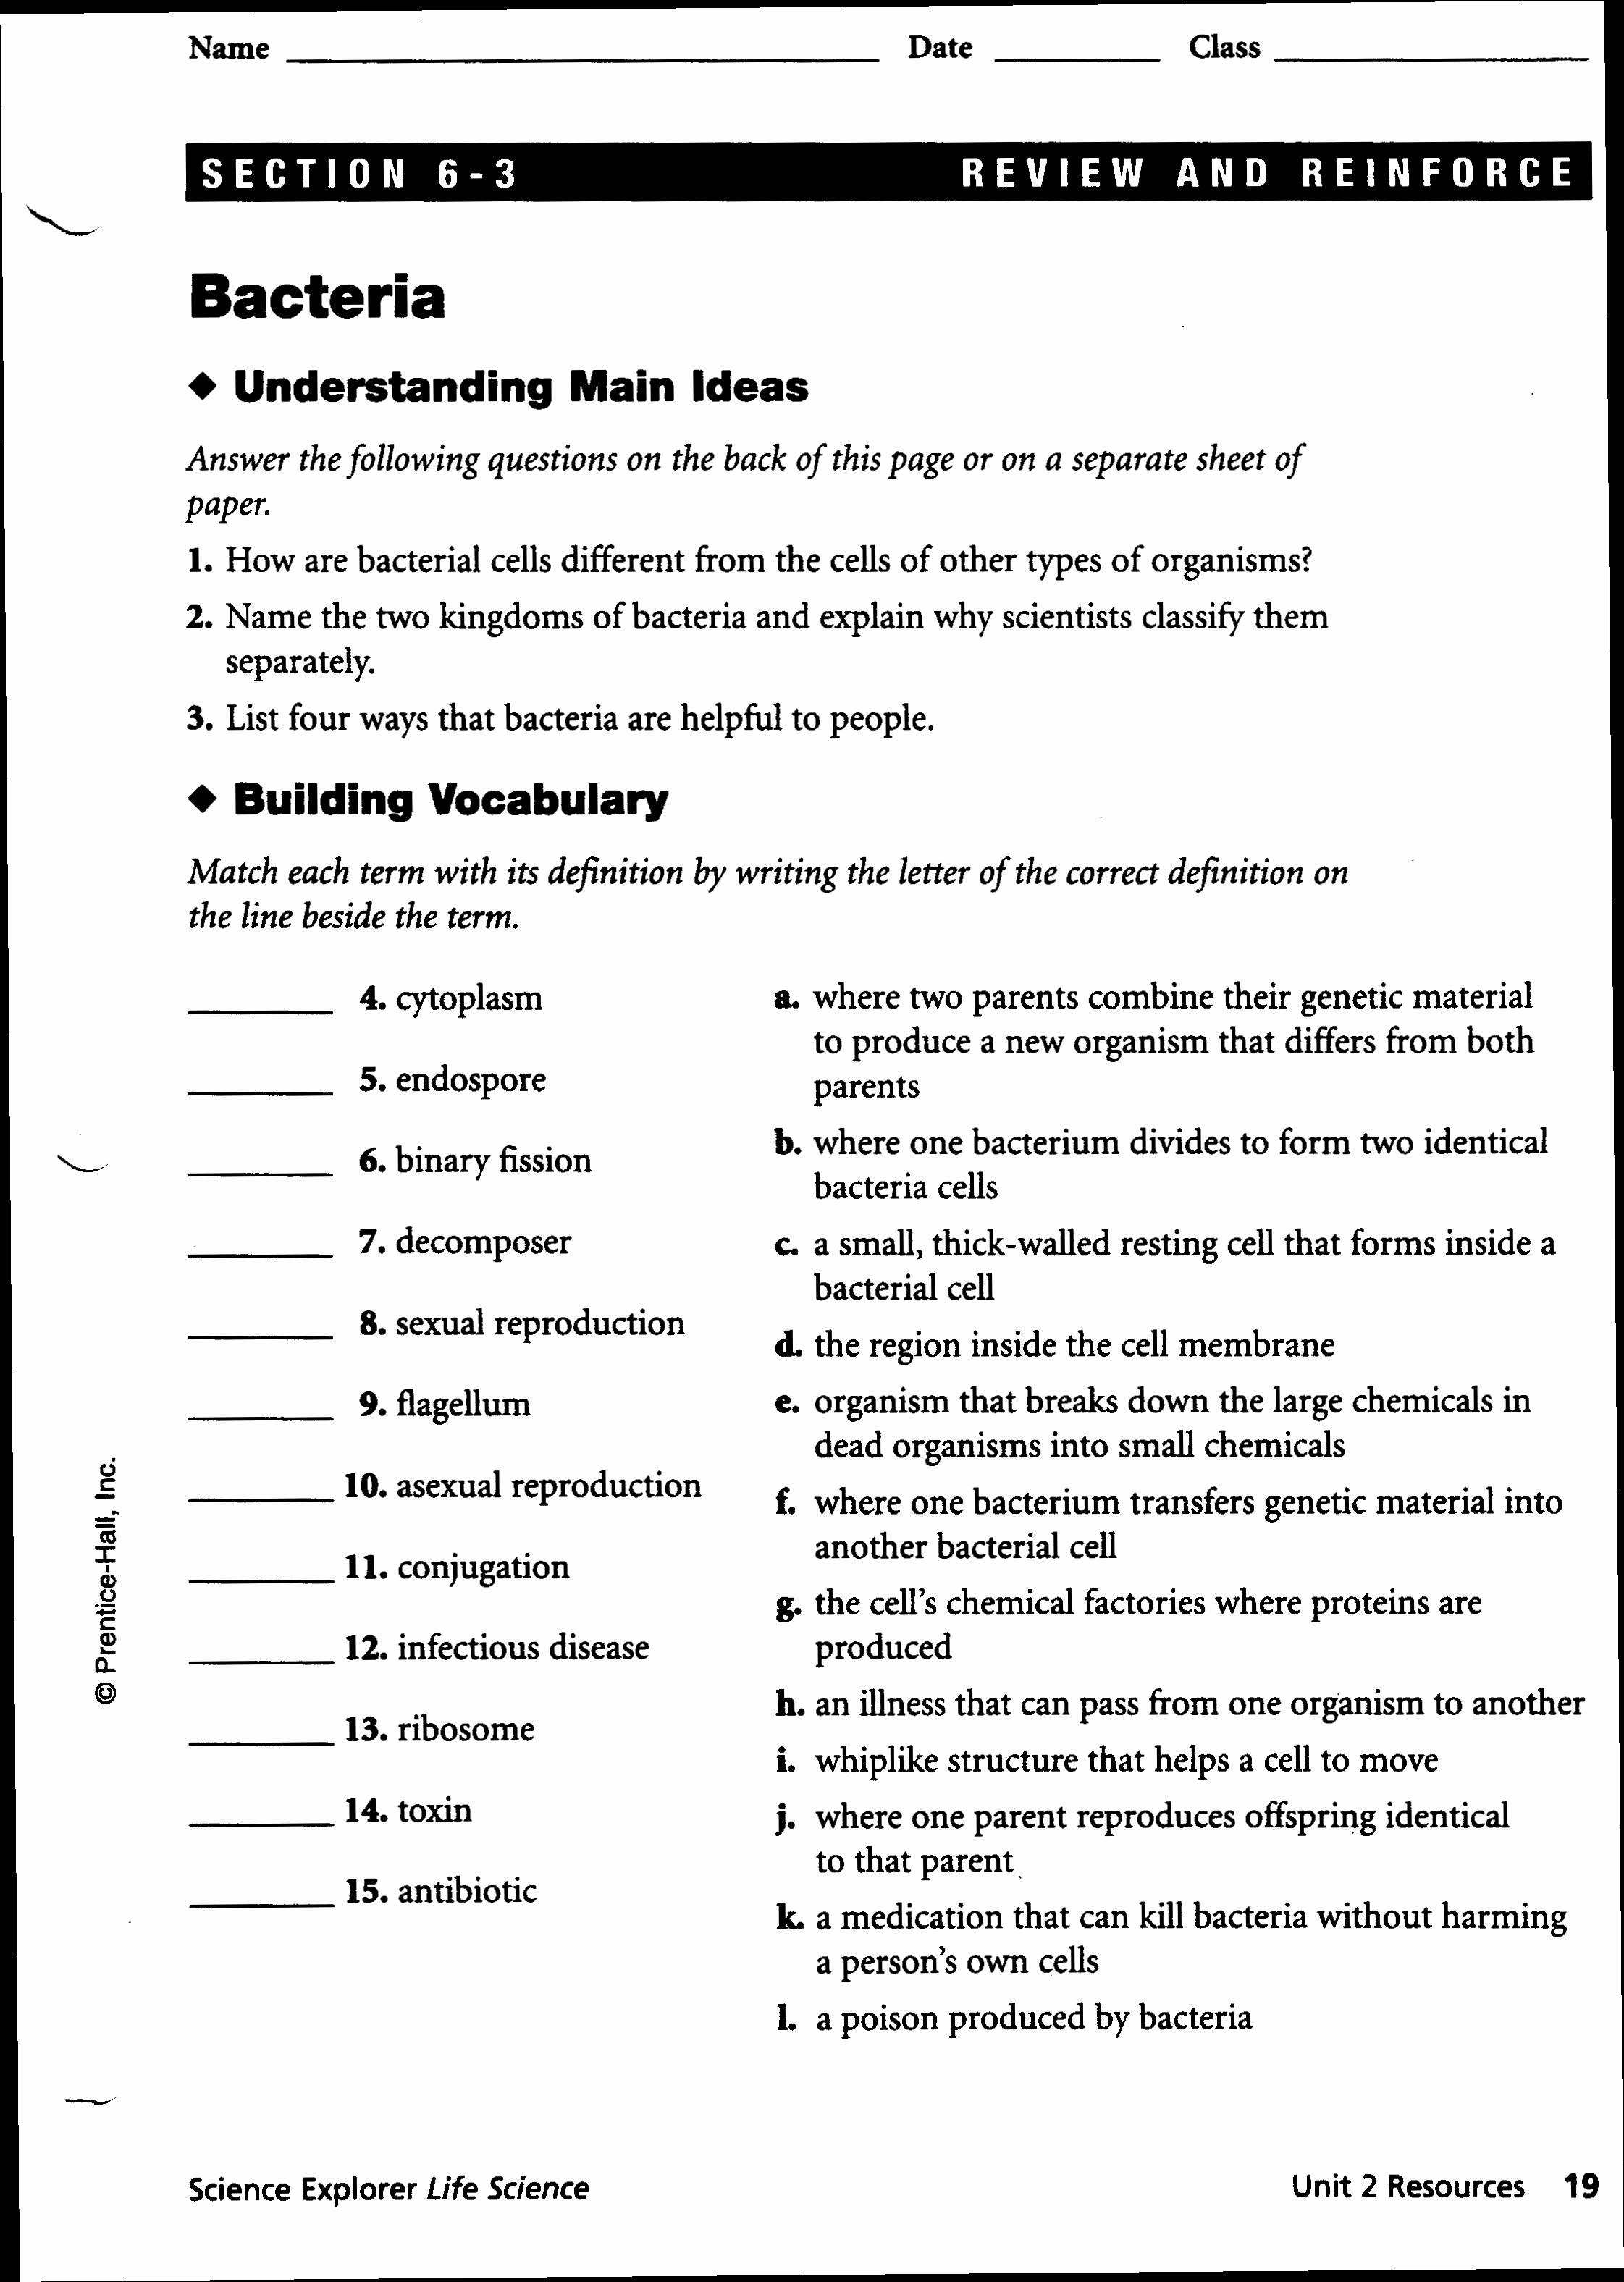 Physical Science Worksheets High School New High School Science | Free Printable High School Science Worksheets